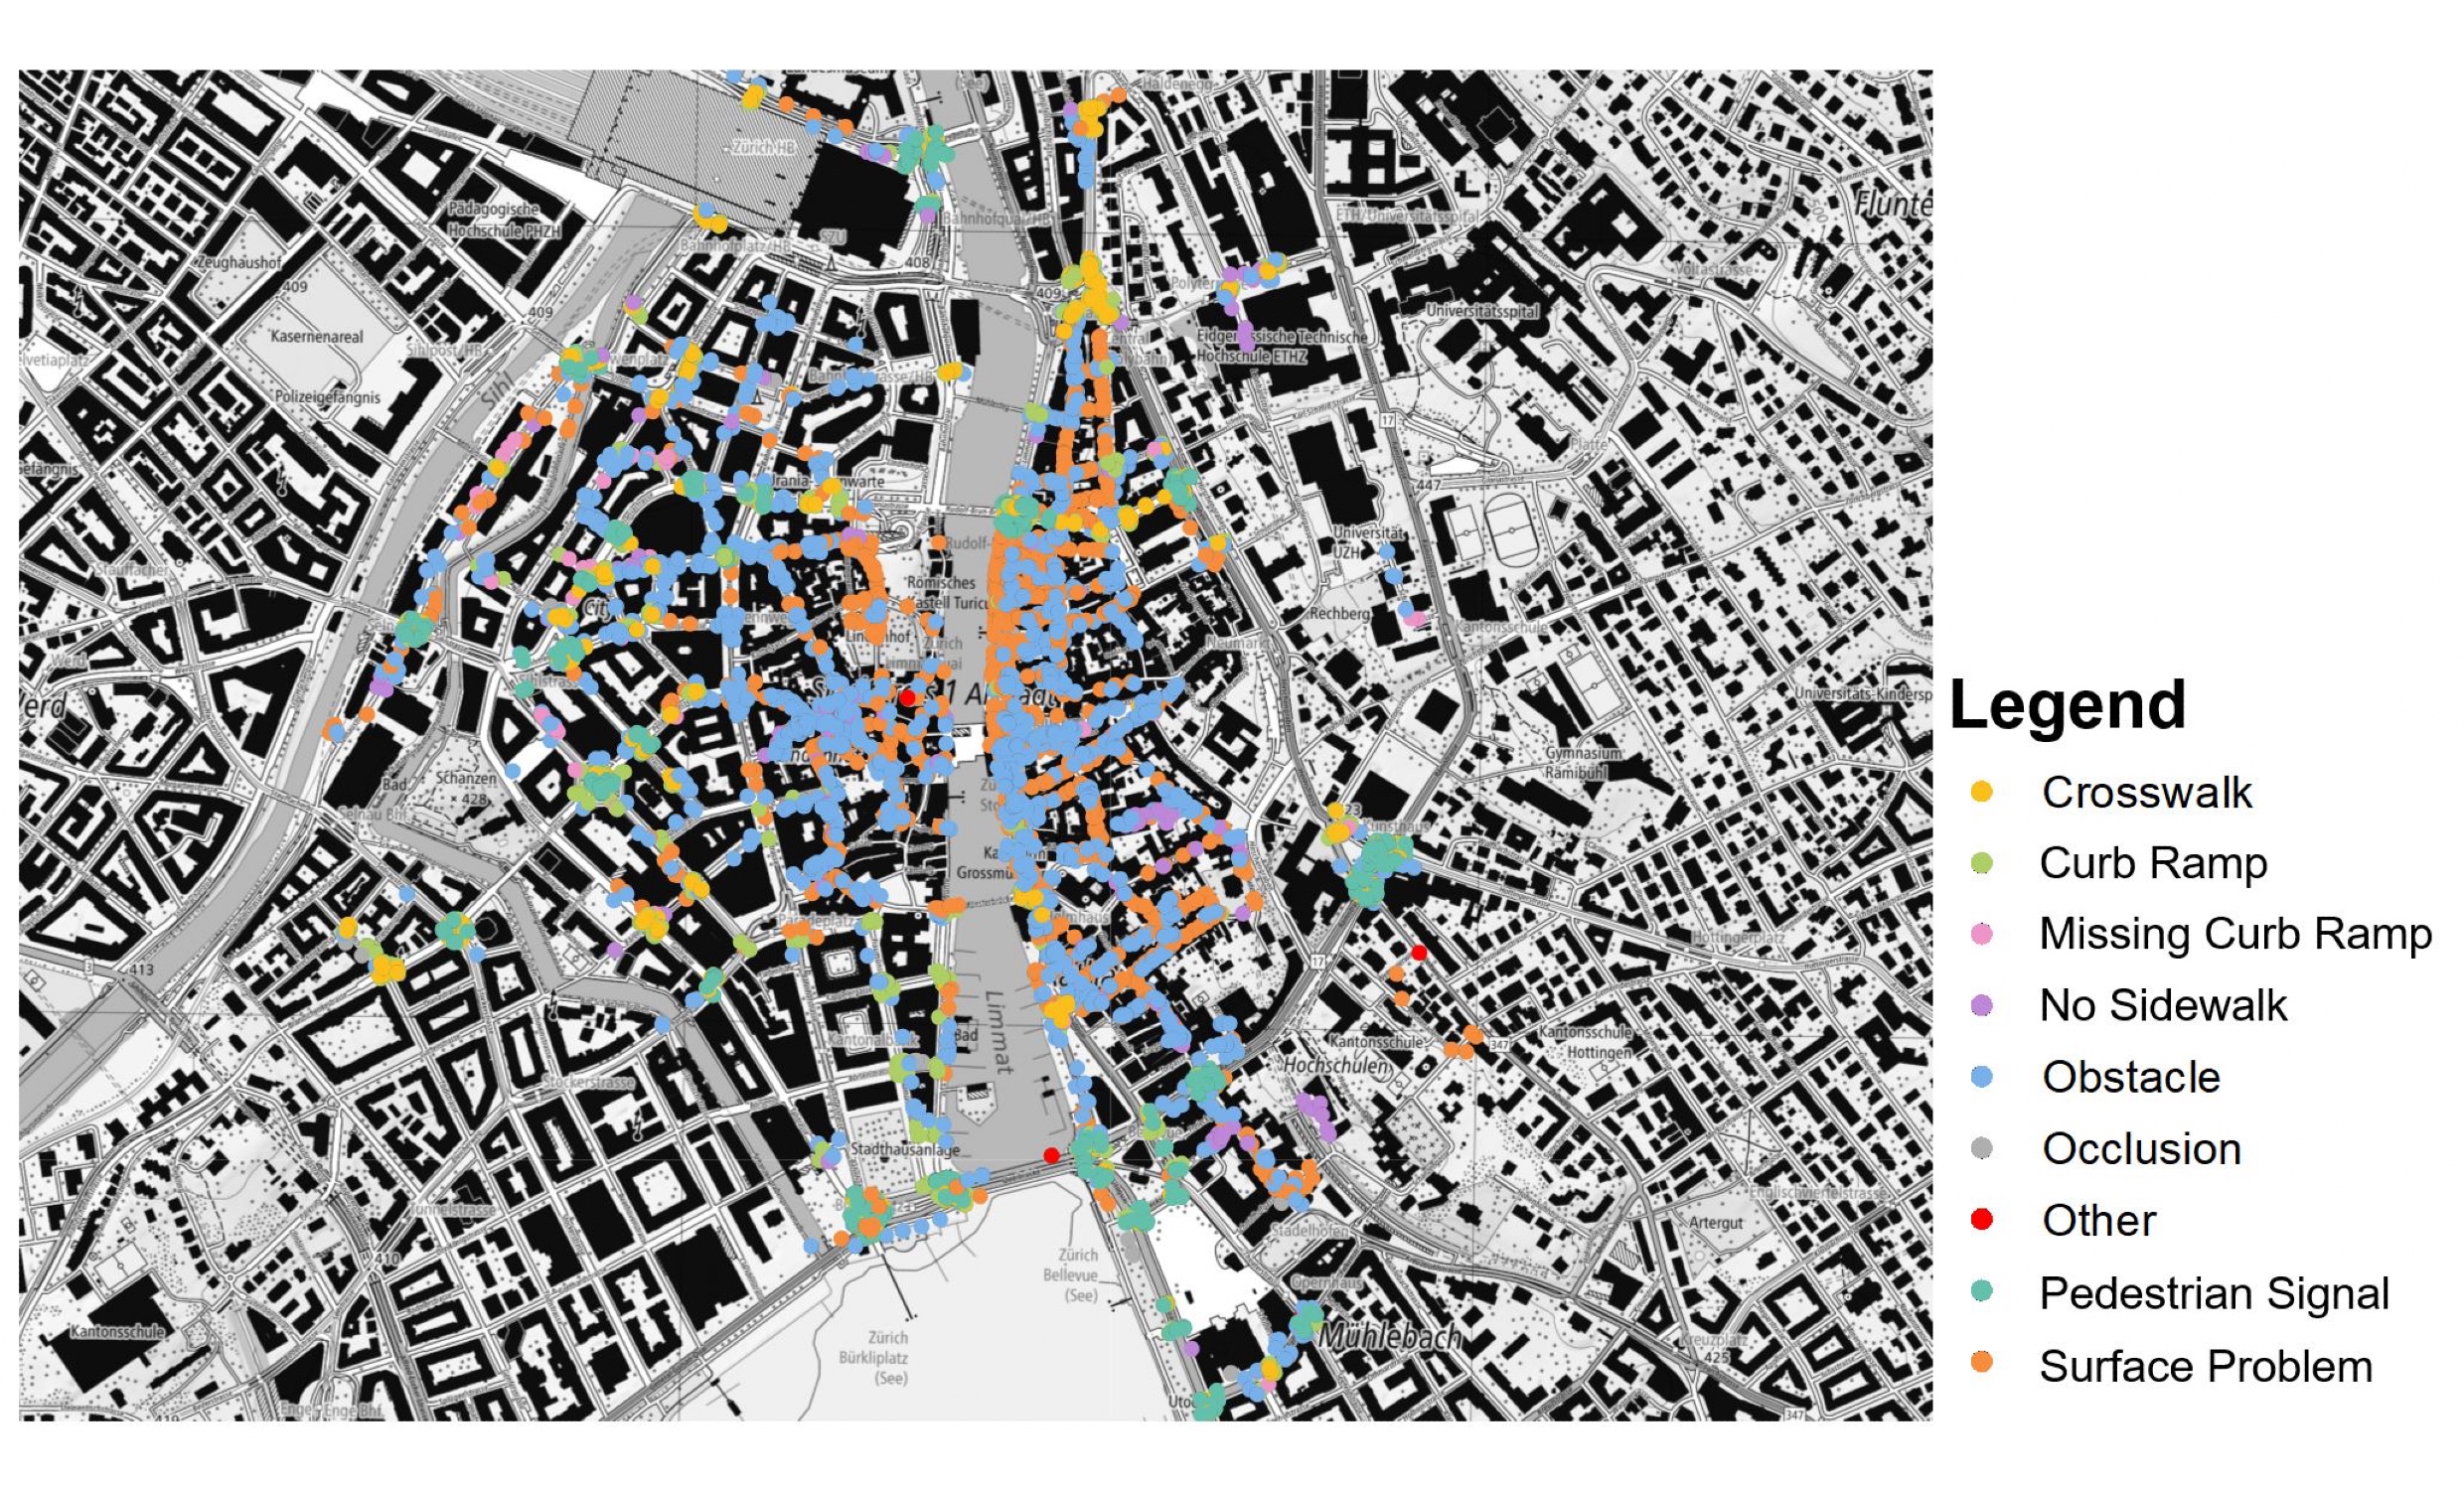 Accessibility data collected in District 1 of Zurich by ZuriACT participants using the Project Sidewalk tool